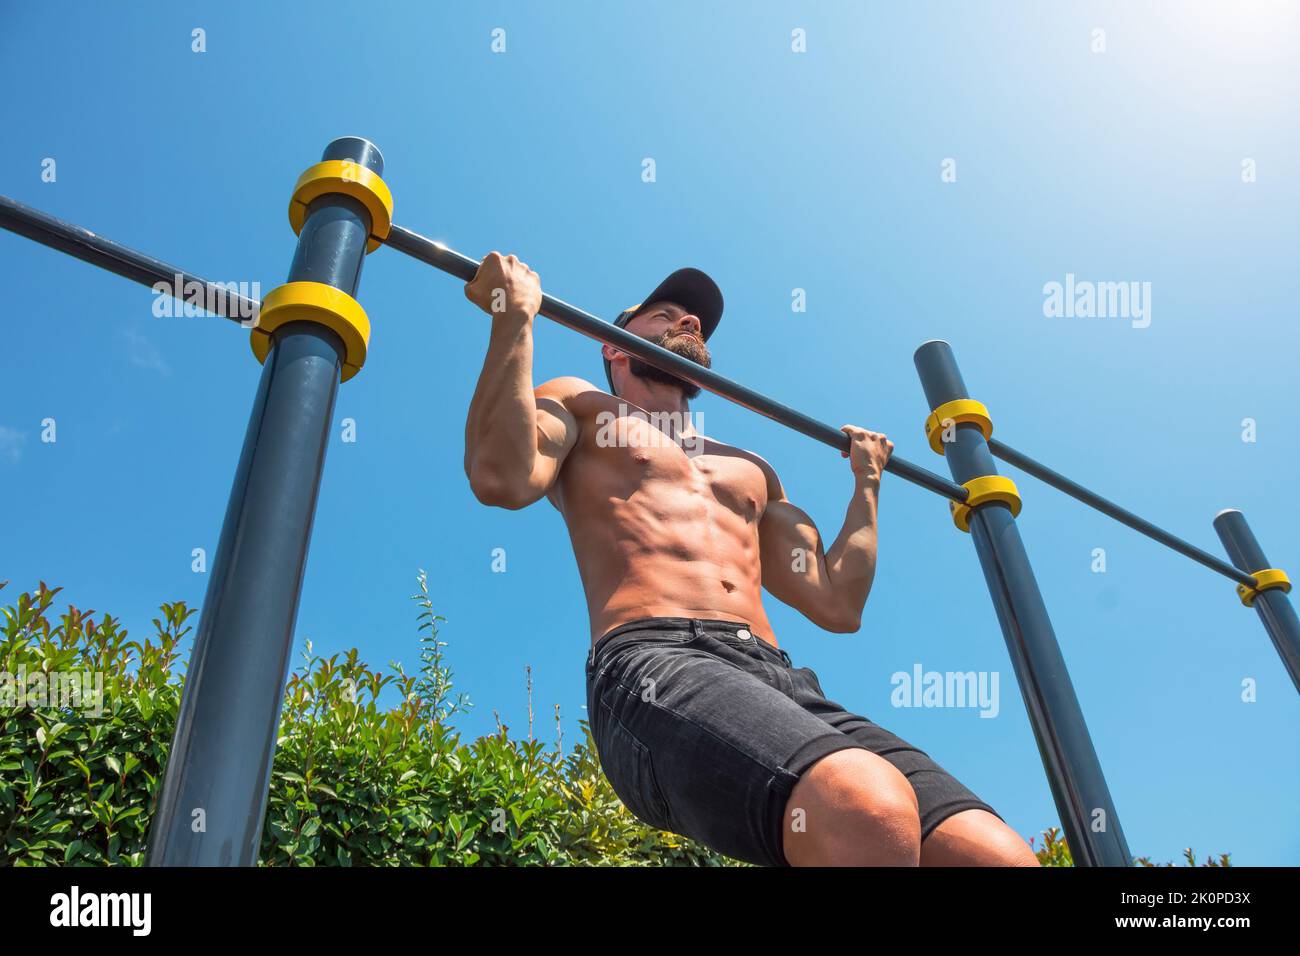 Muscular man in a cap doing reverse pull-up on the horizontal bar in the park outdoors Stock Photo